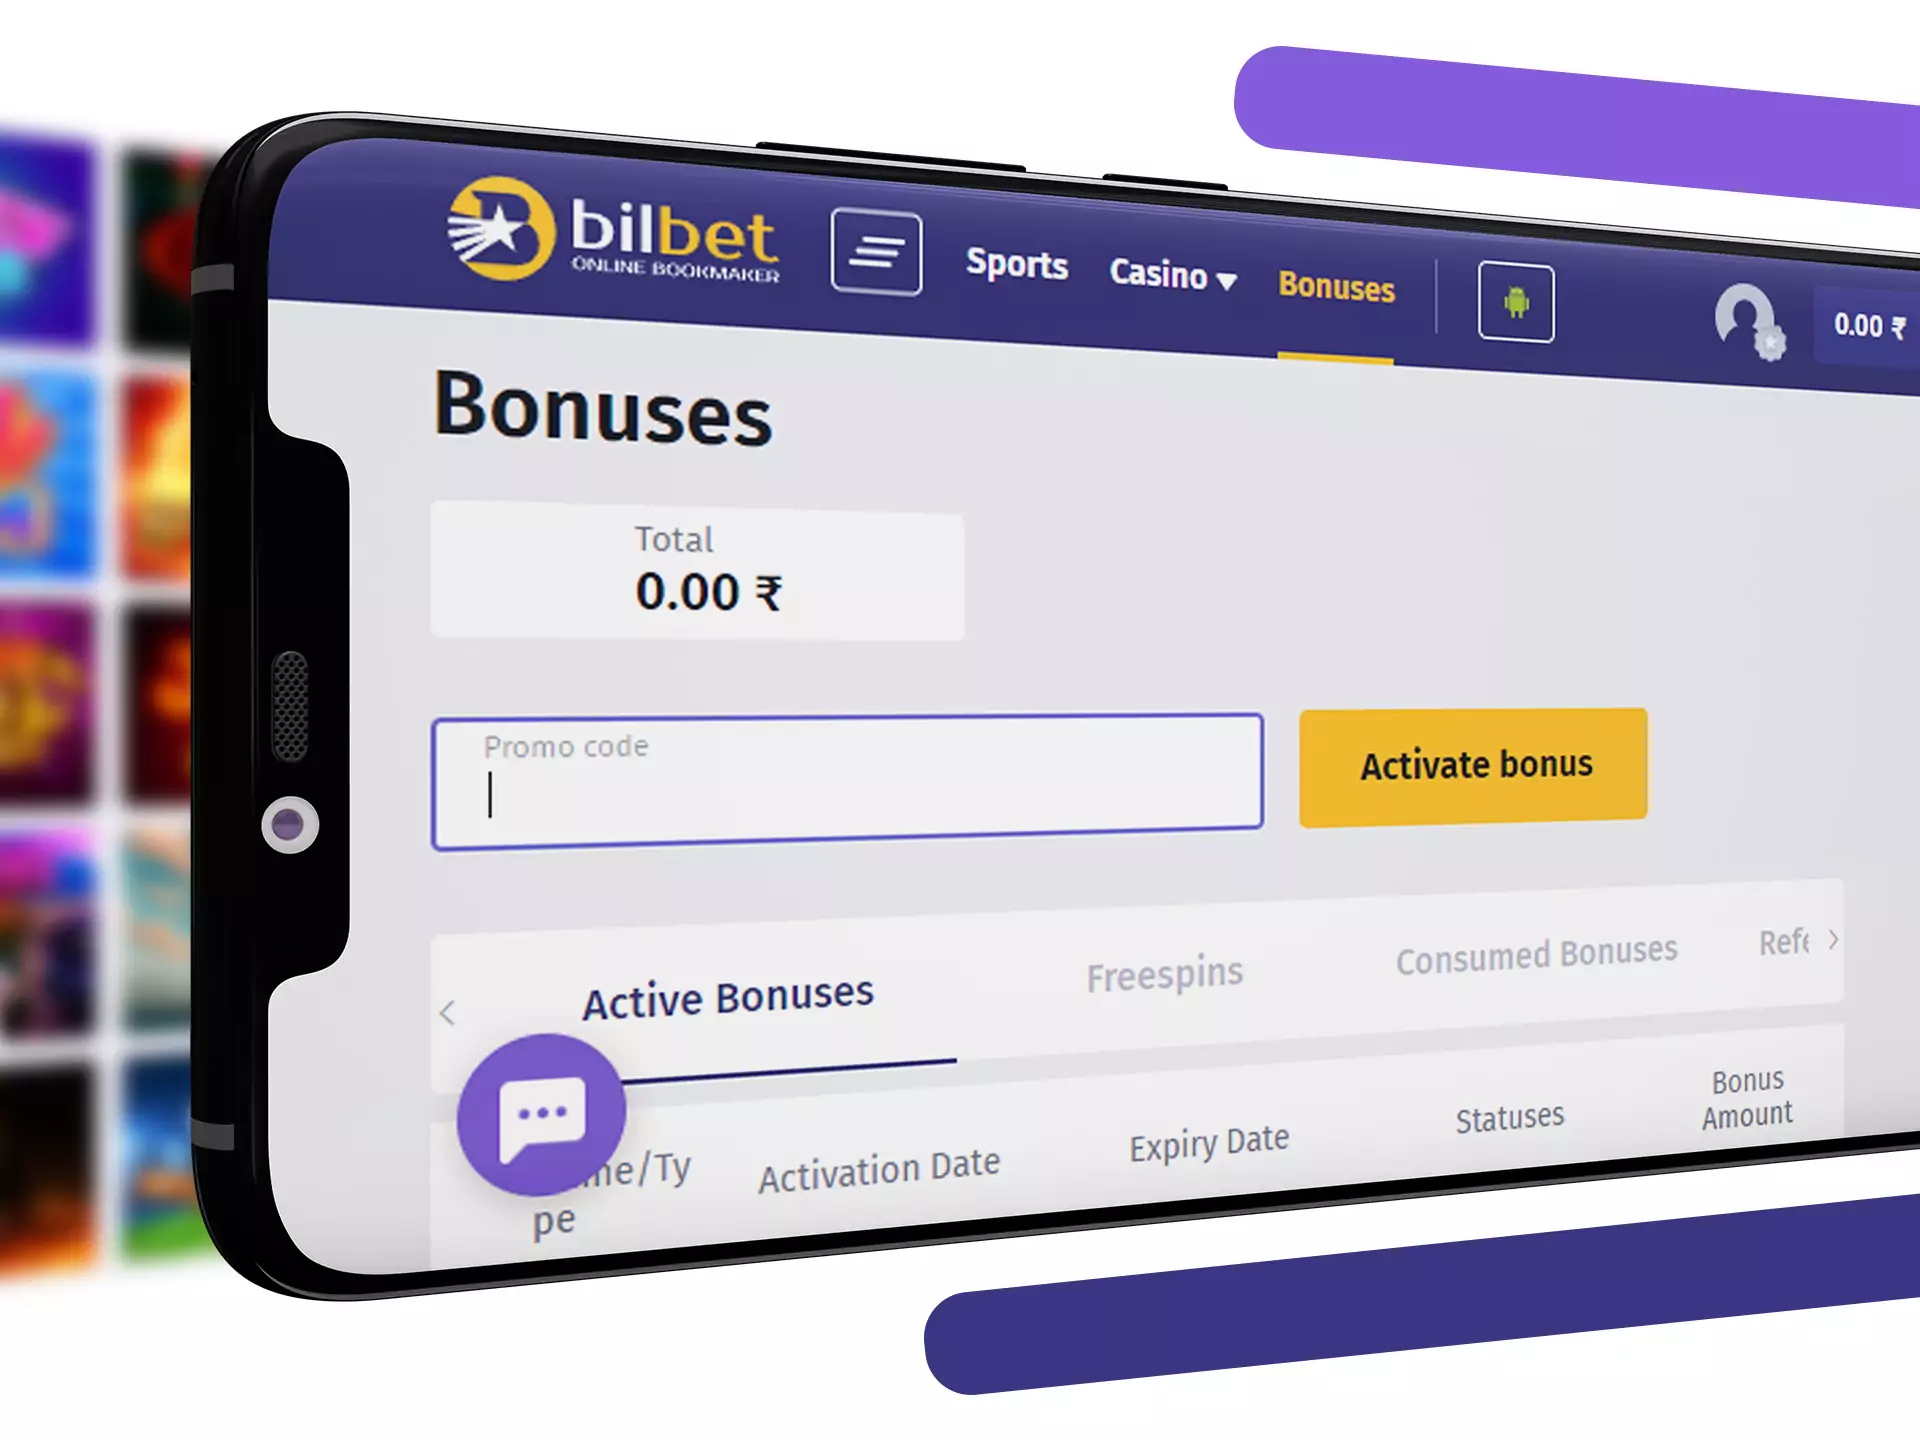 Check for new Bilbet promocodes.